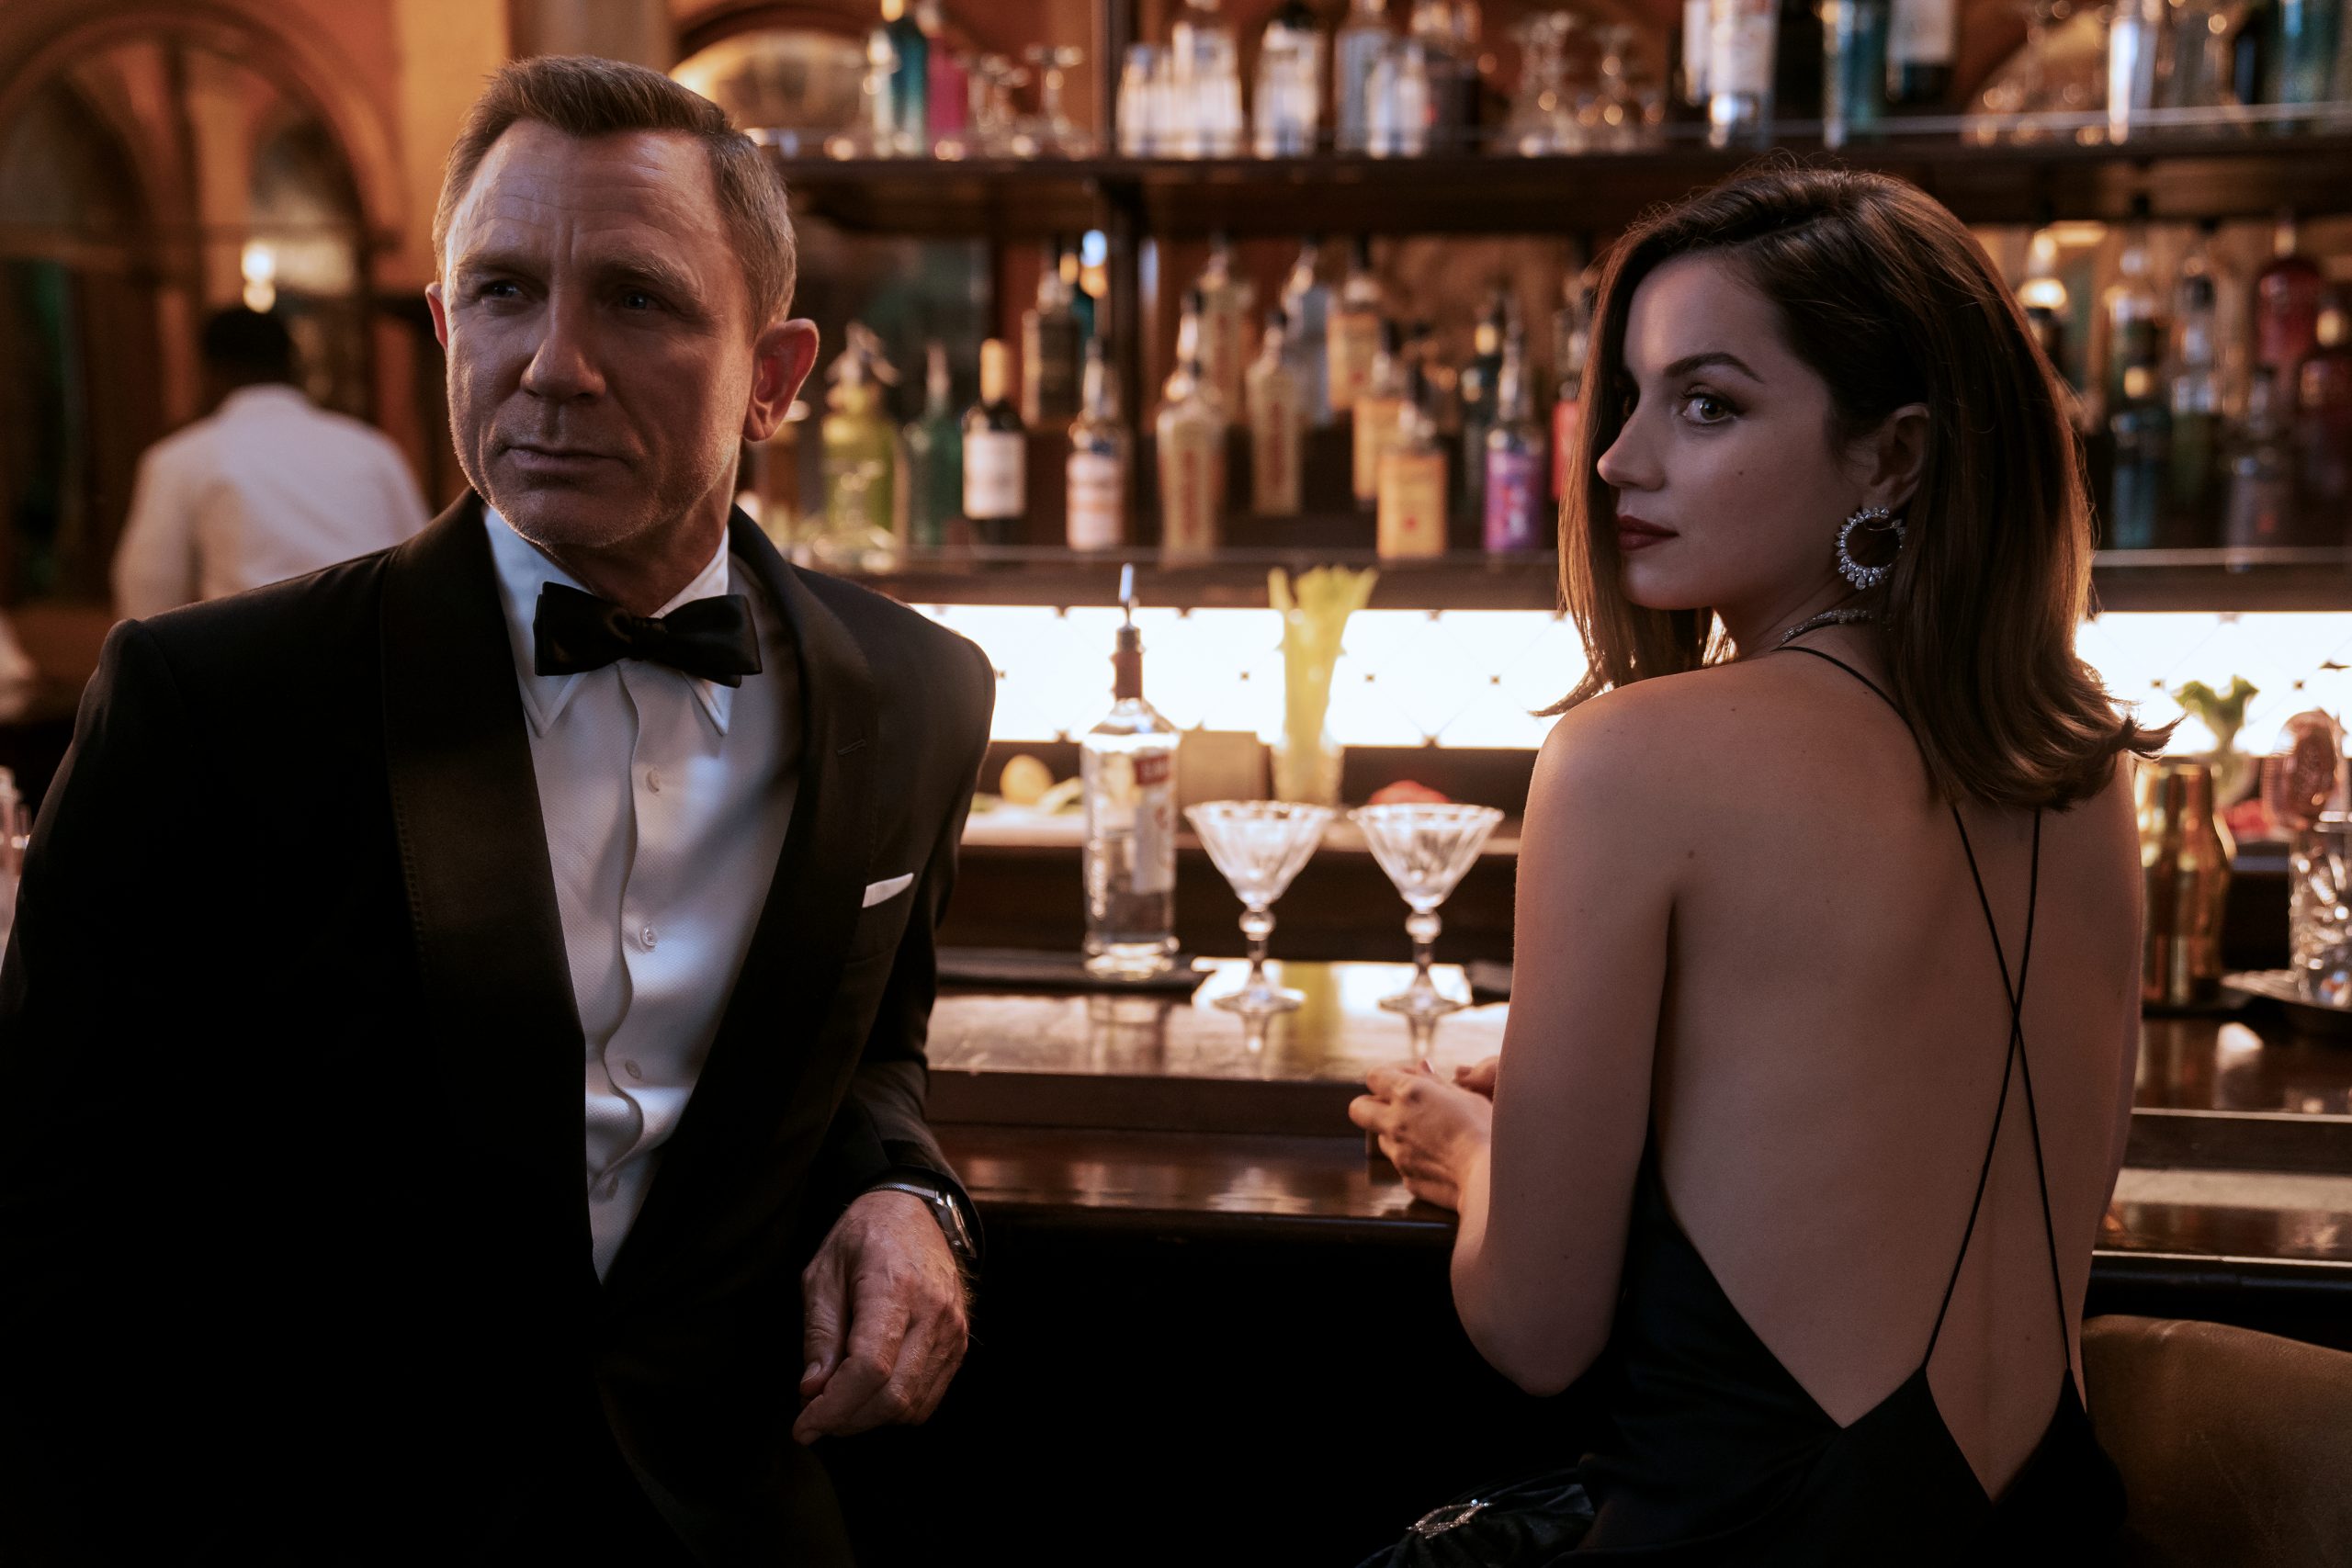 B25_39456_RC2
James Bond (Daniel Craig) and Paloma (Ana de Armas) in
NO TIME TO DIE, 
an EON Productions and Metro-Goldwyn-Mayer Studios film
Credit: Nicola Dove
© 2020 DANJAQ, LLC AND MGM.  ALL RIGHTS RESERVED.